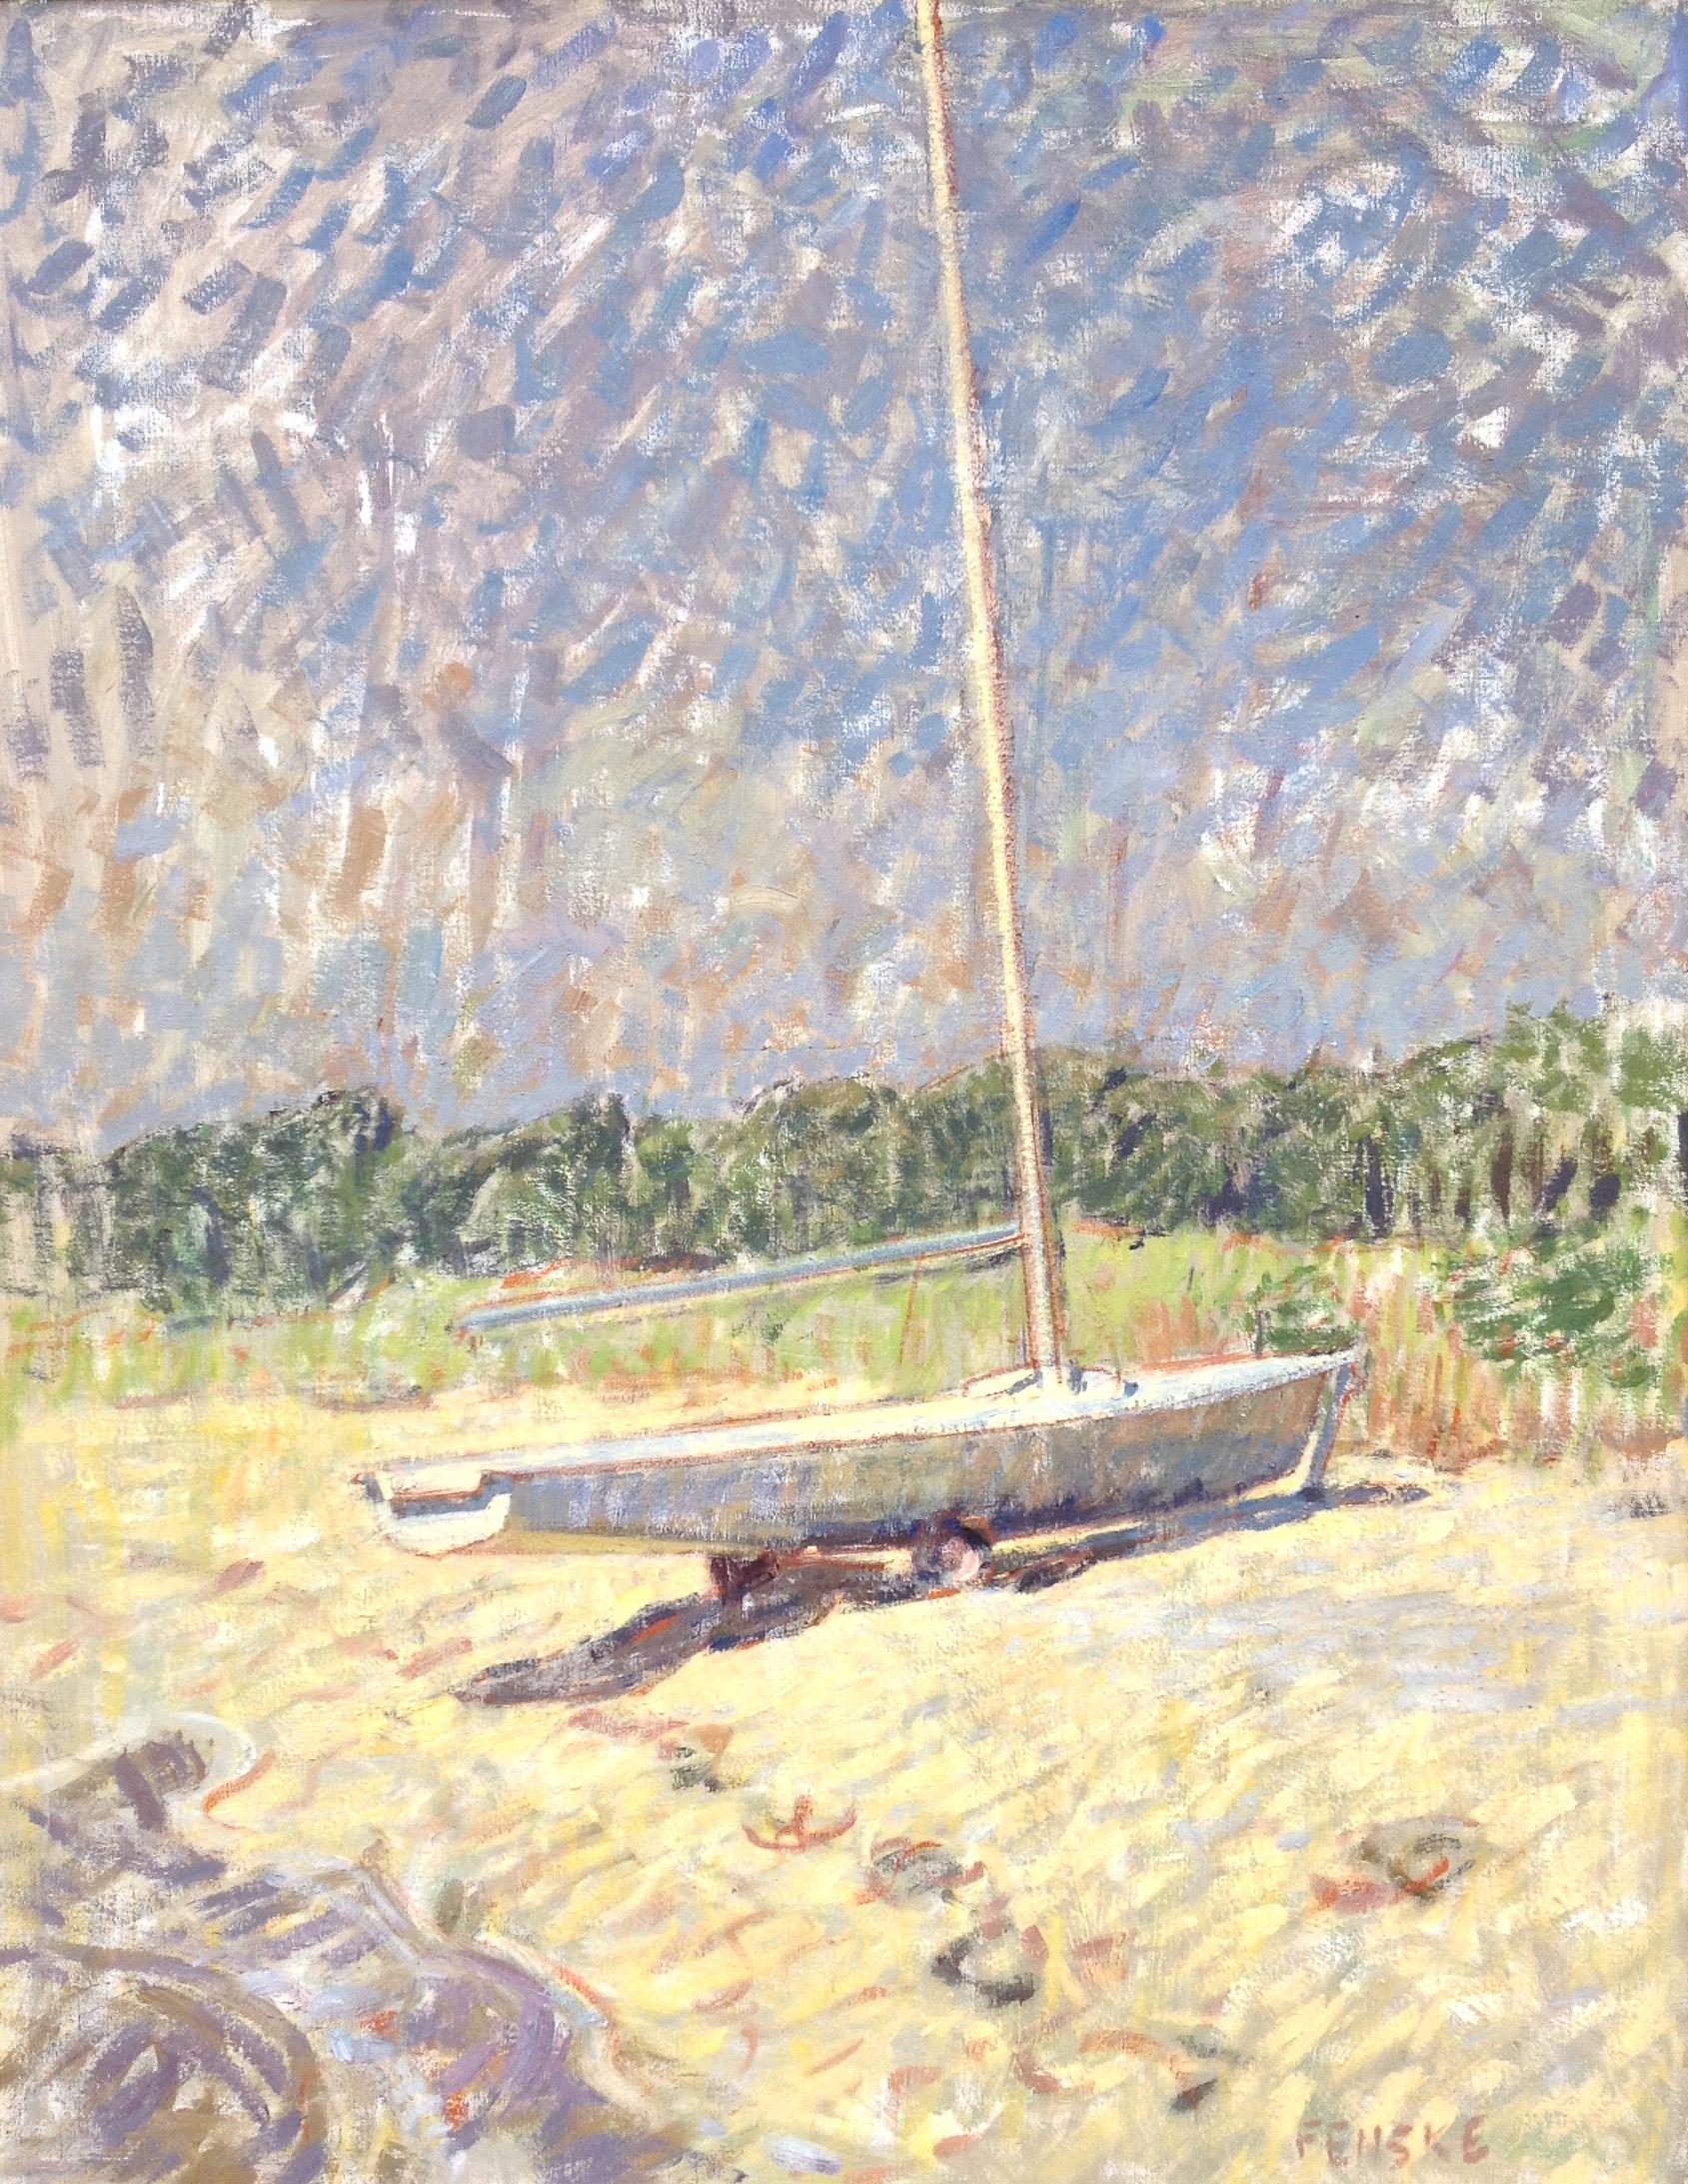 Ben Fenske Figurative Painting - "Sailboat" contemporary impressionist oil painting of boat on the beach, summer